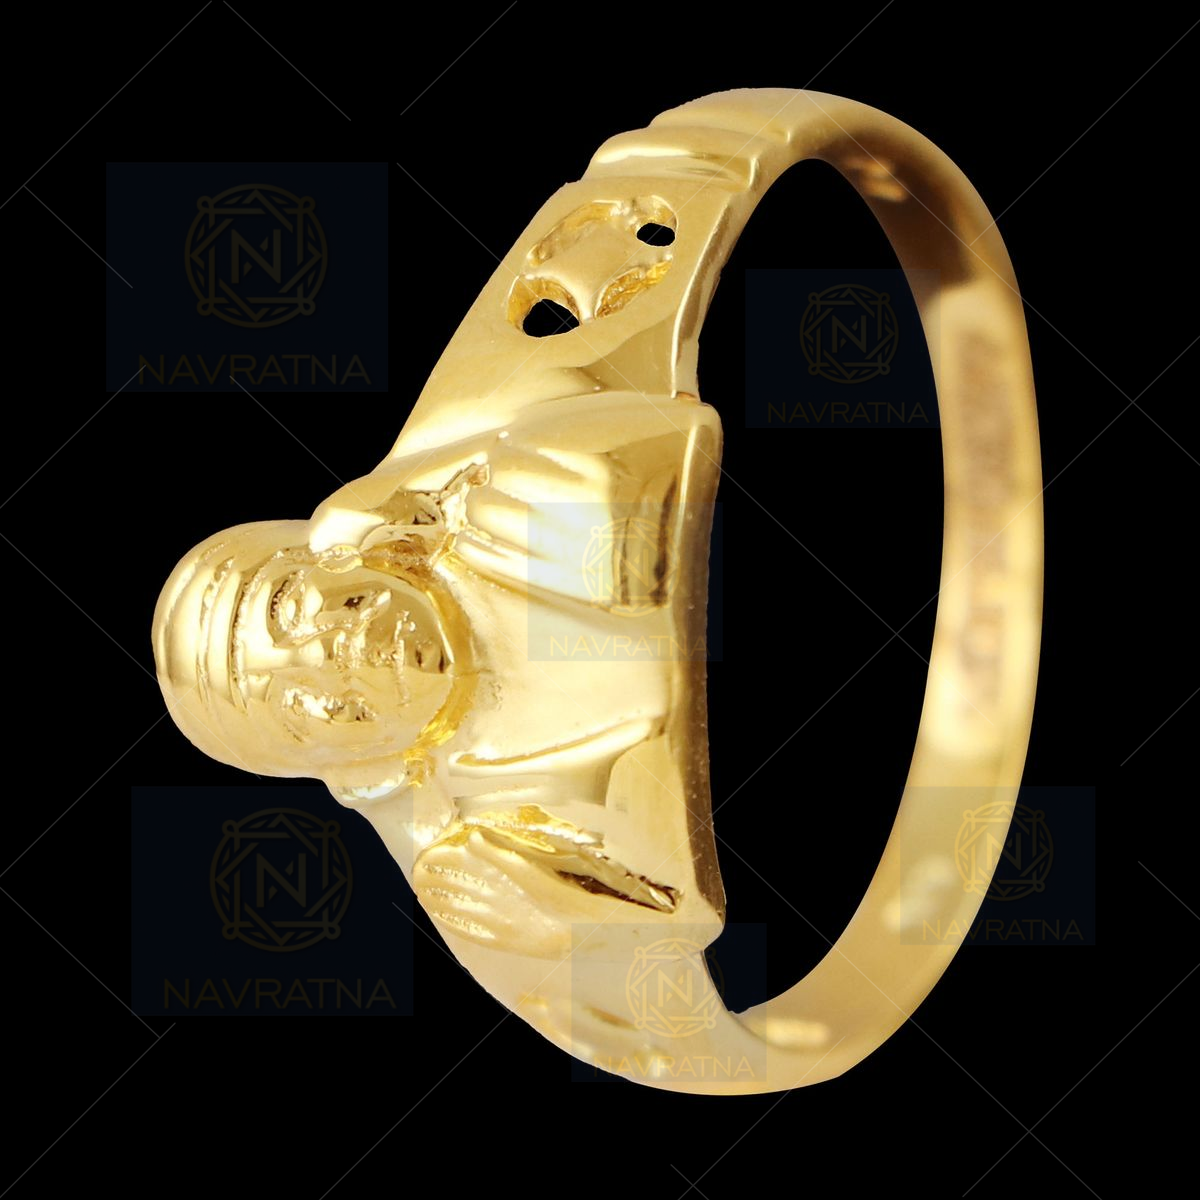 22K Gold 'Sai Baba' Ring with Cz For Men - 235-GR6594 in 6.800 Grams